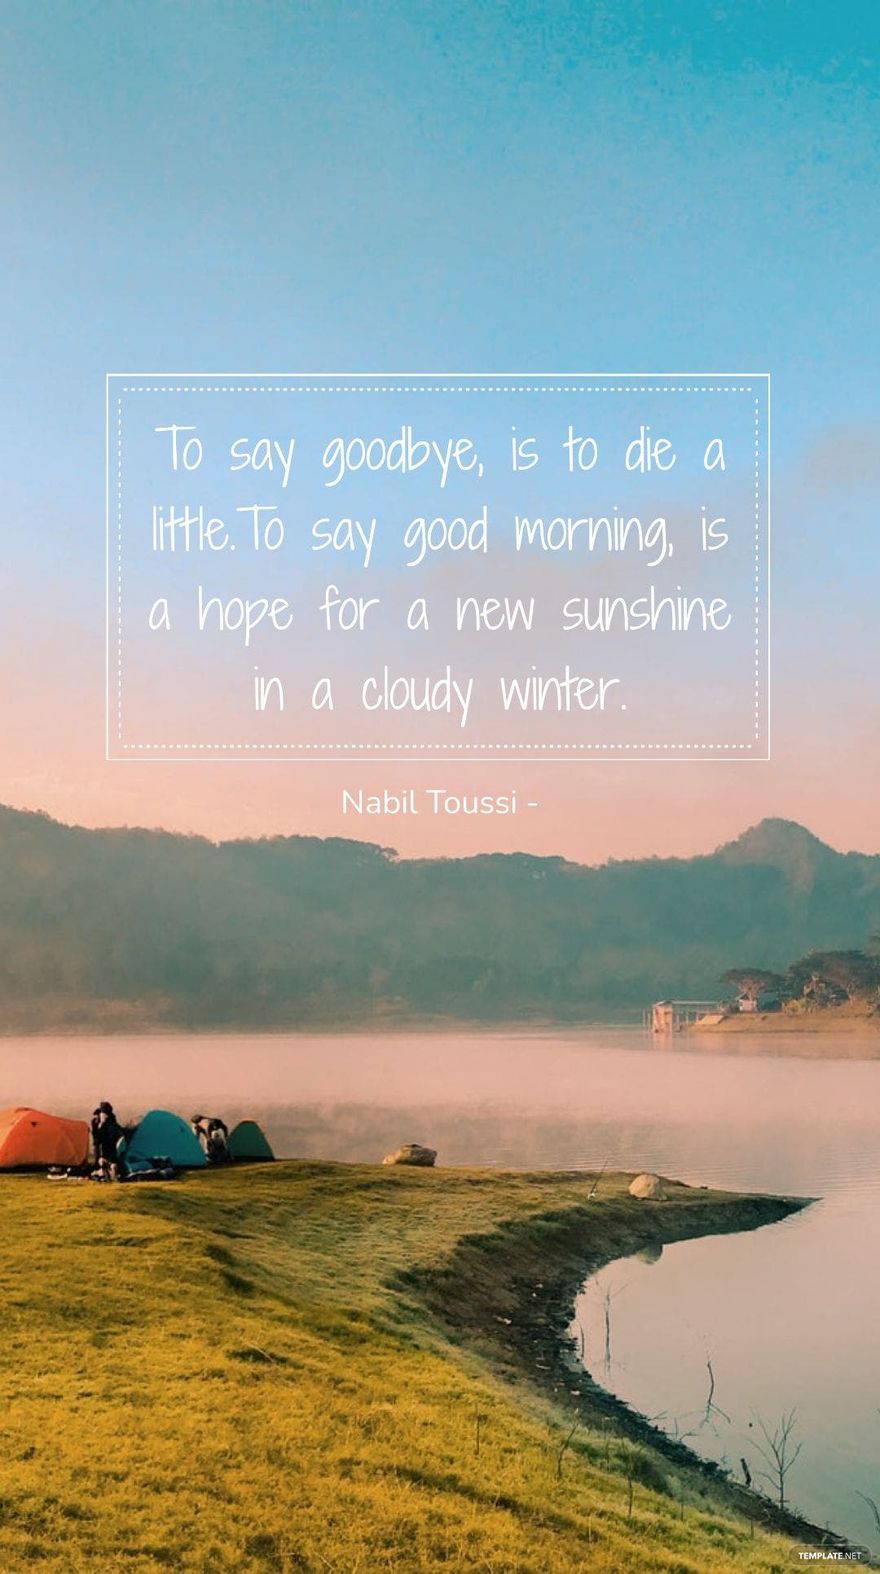 Nabil Toussi - To say goodbye, is to die a little.To say good morning, is a hope for a new sunshine in a cloudy winter.